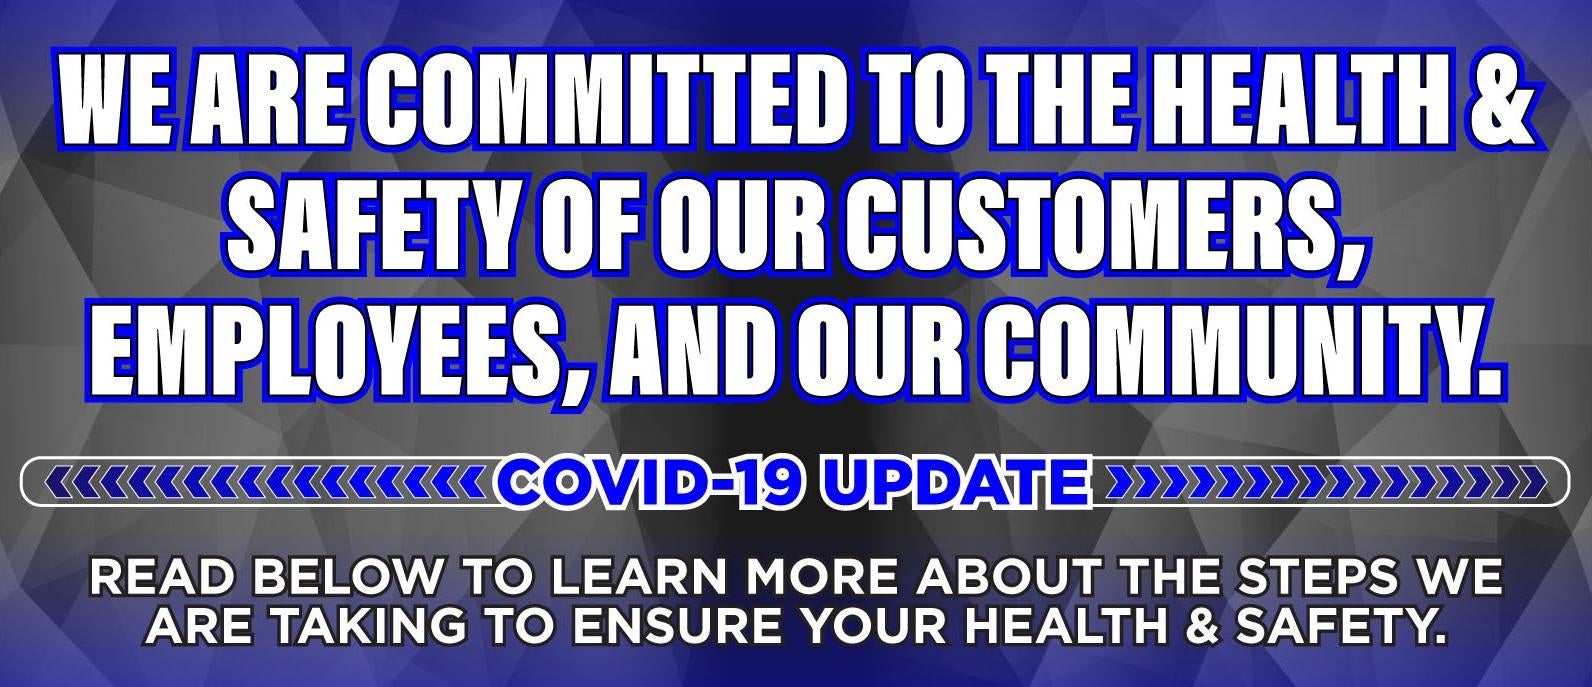 We Are Committed to the Health and Safety of Our Customers, Employees, and our Community